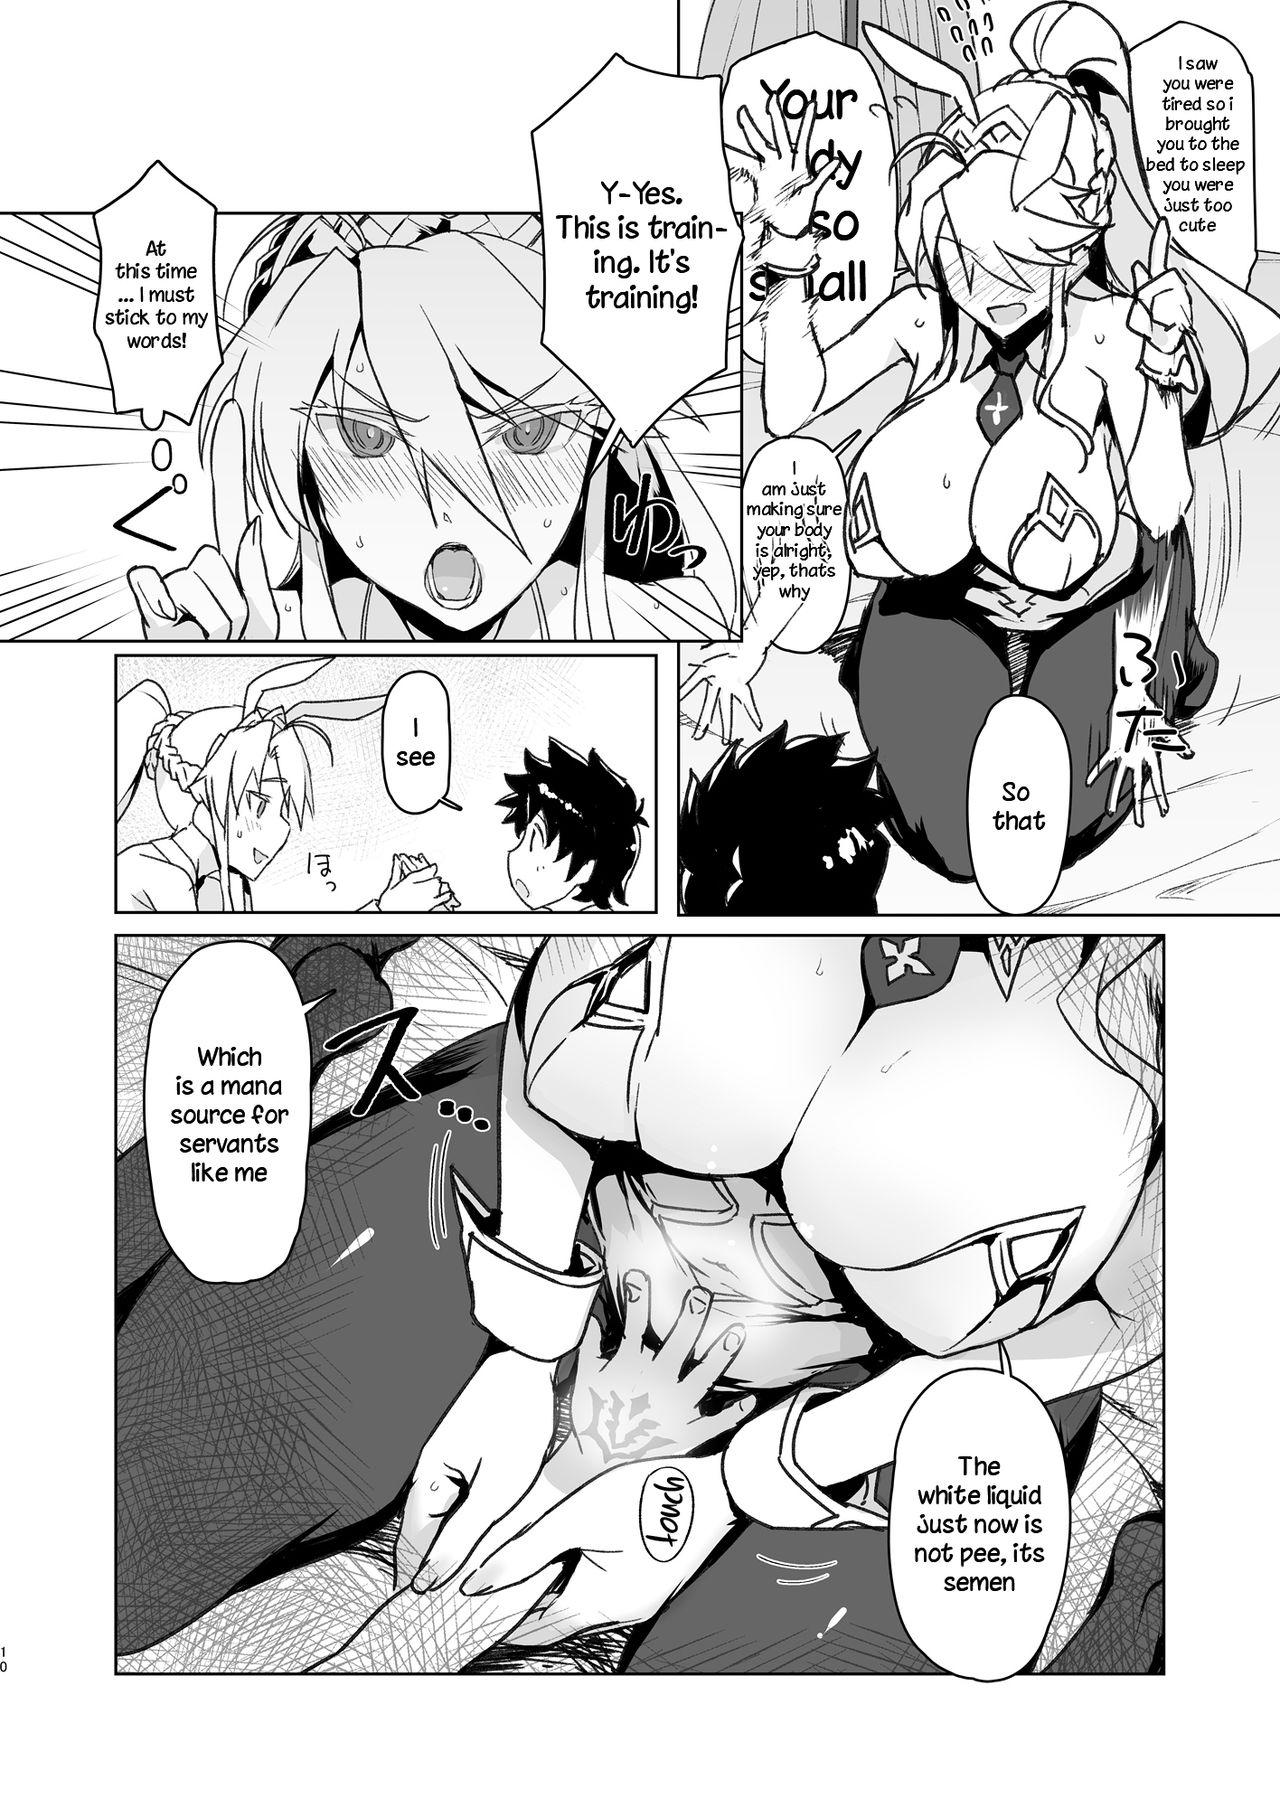 Real Amature Porn Melancholic Summer - Fate grand order Old Vs Young - Page 9